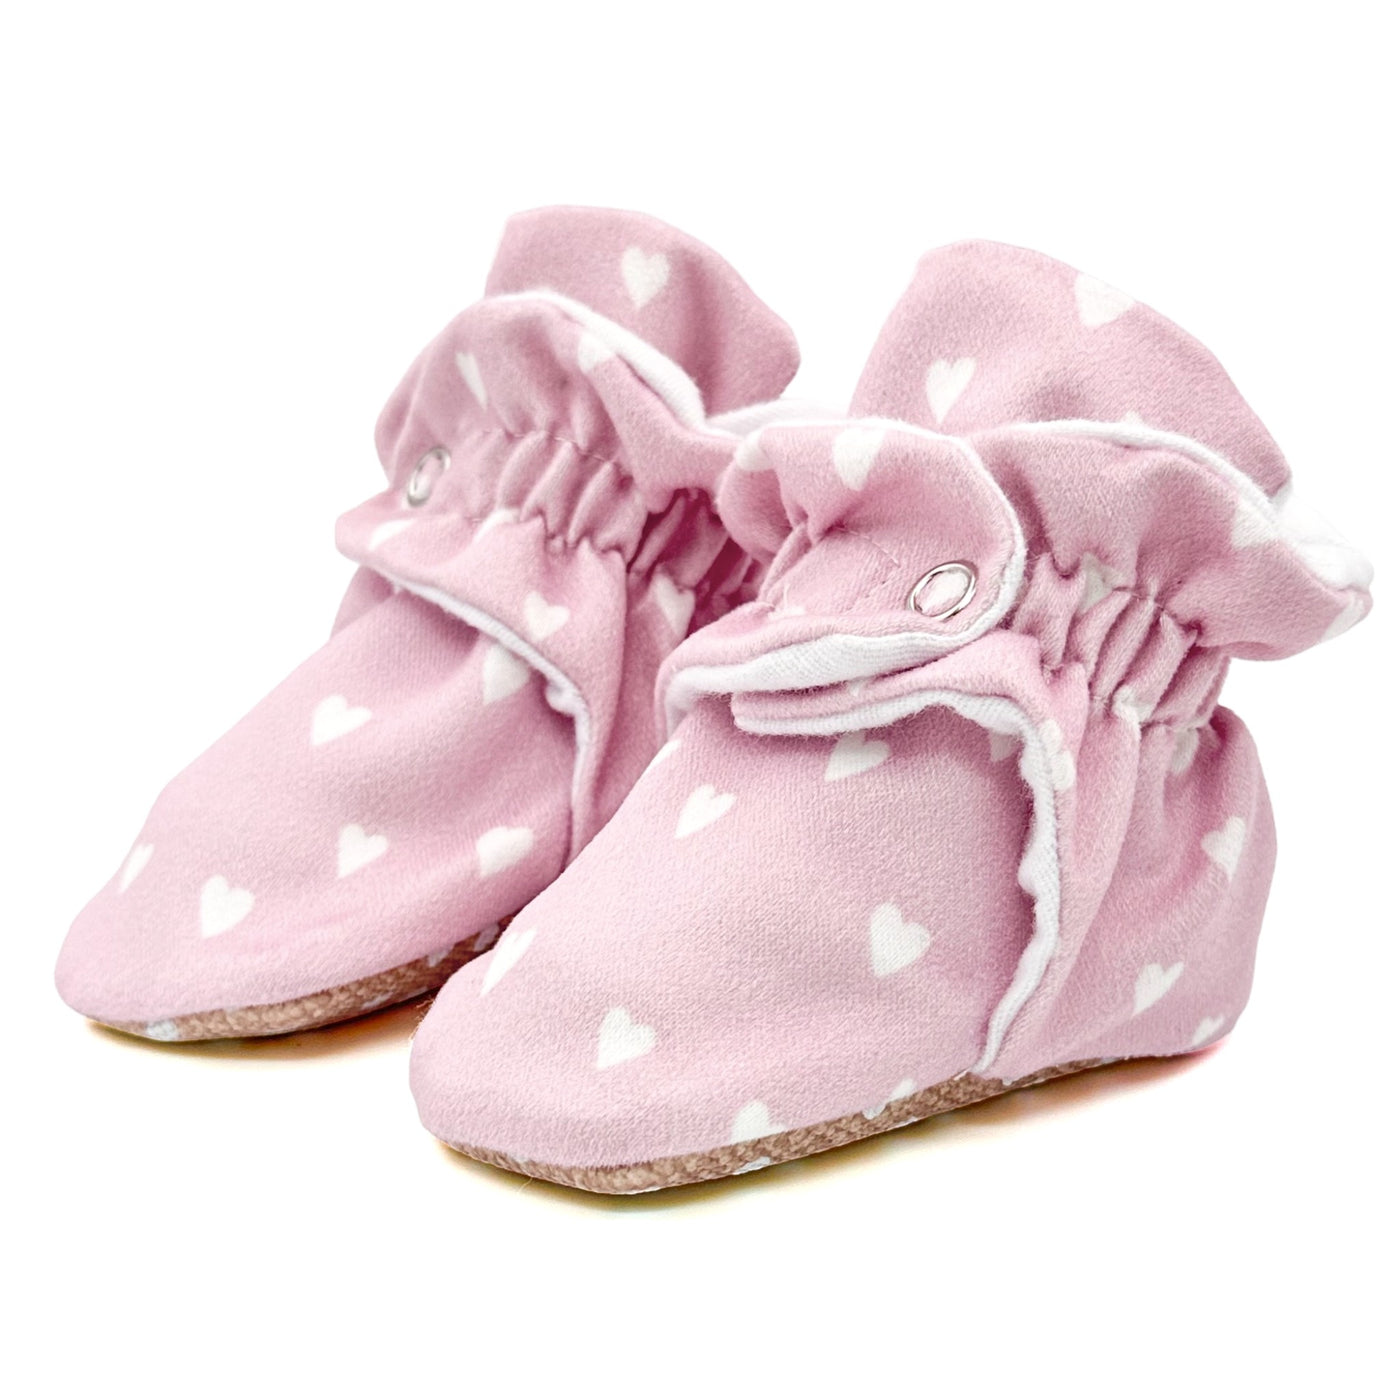 Stay-on, Non-Slip, Baby Booties - Pink Hearts - Snugabugz